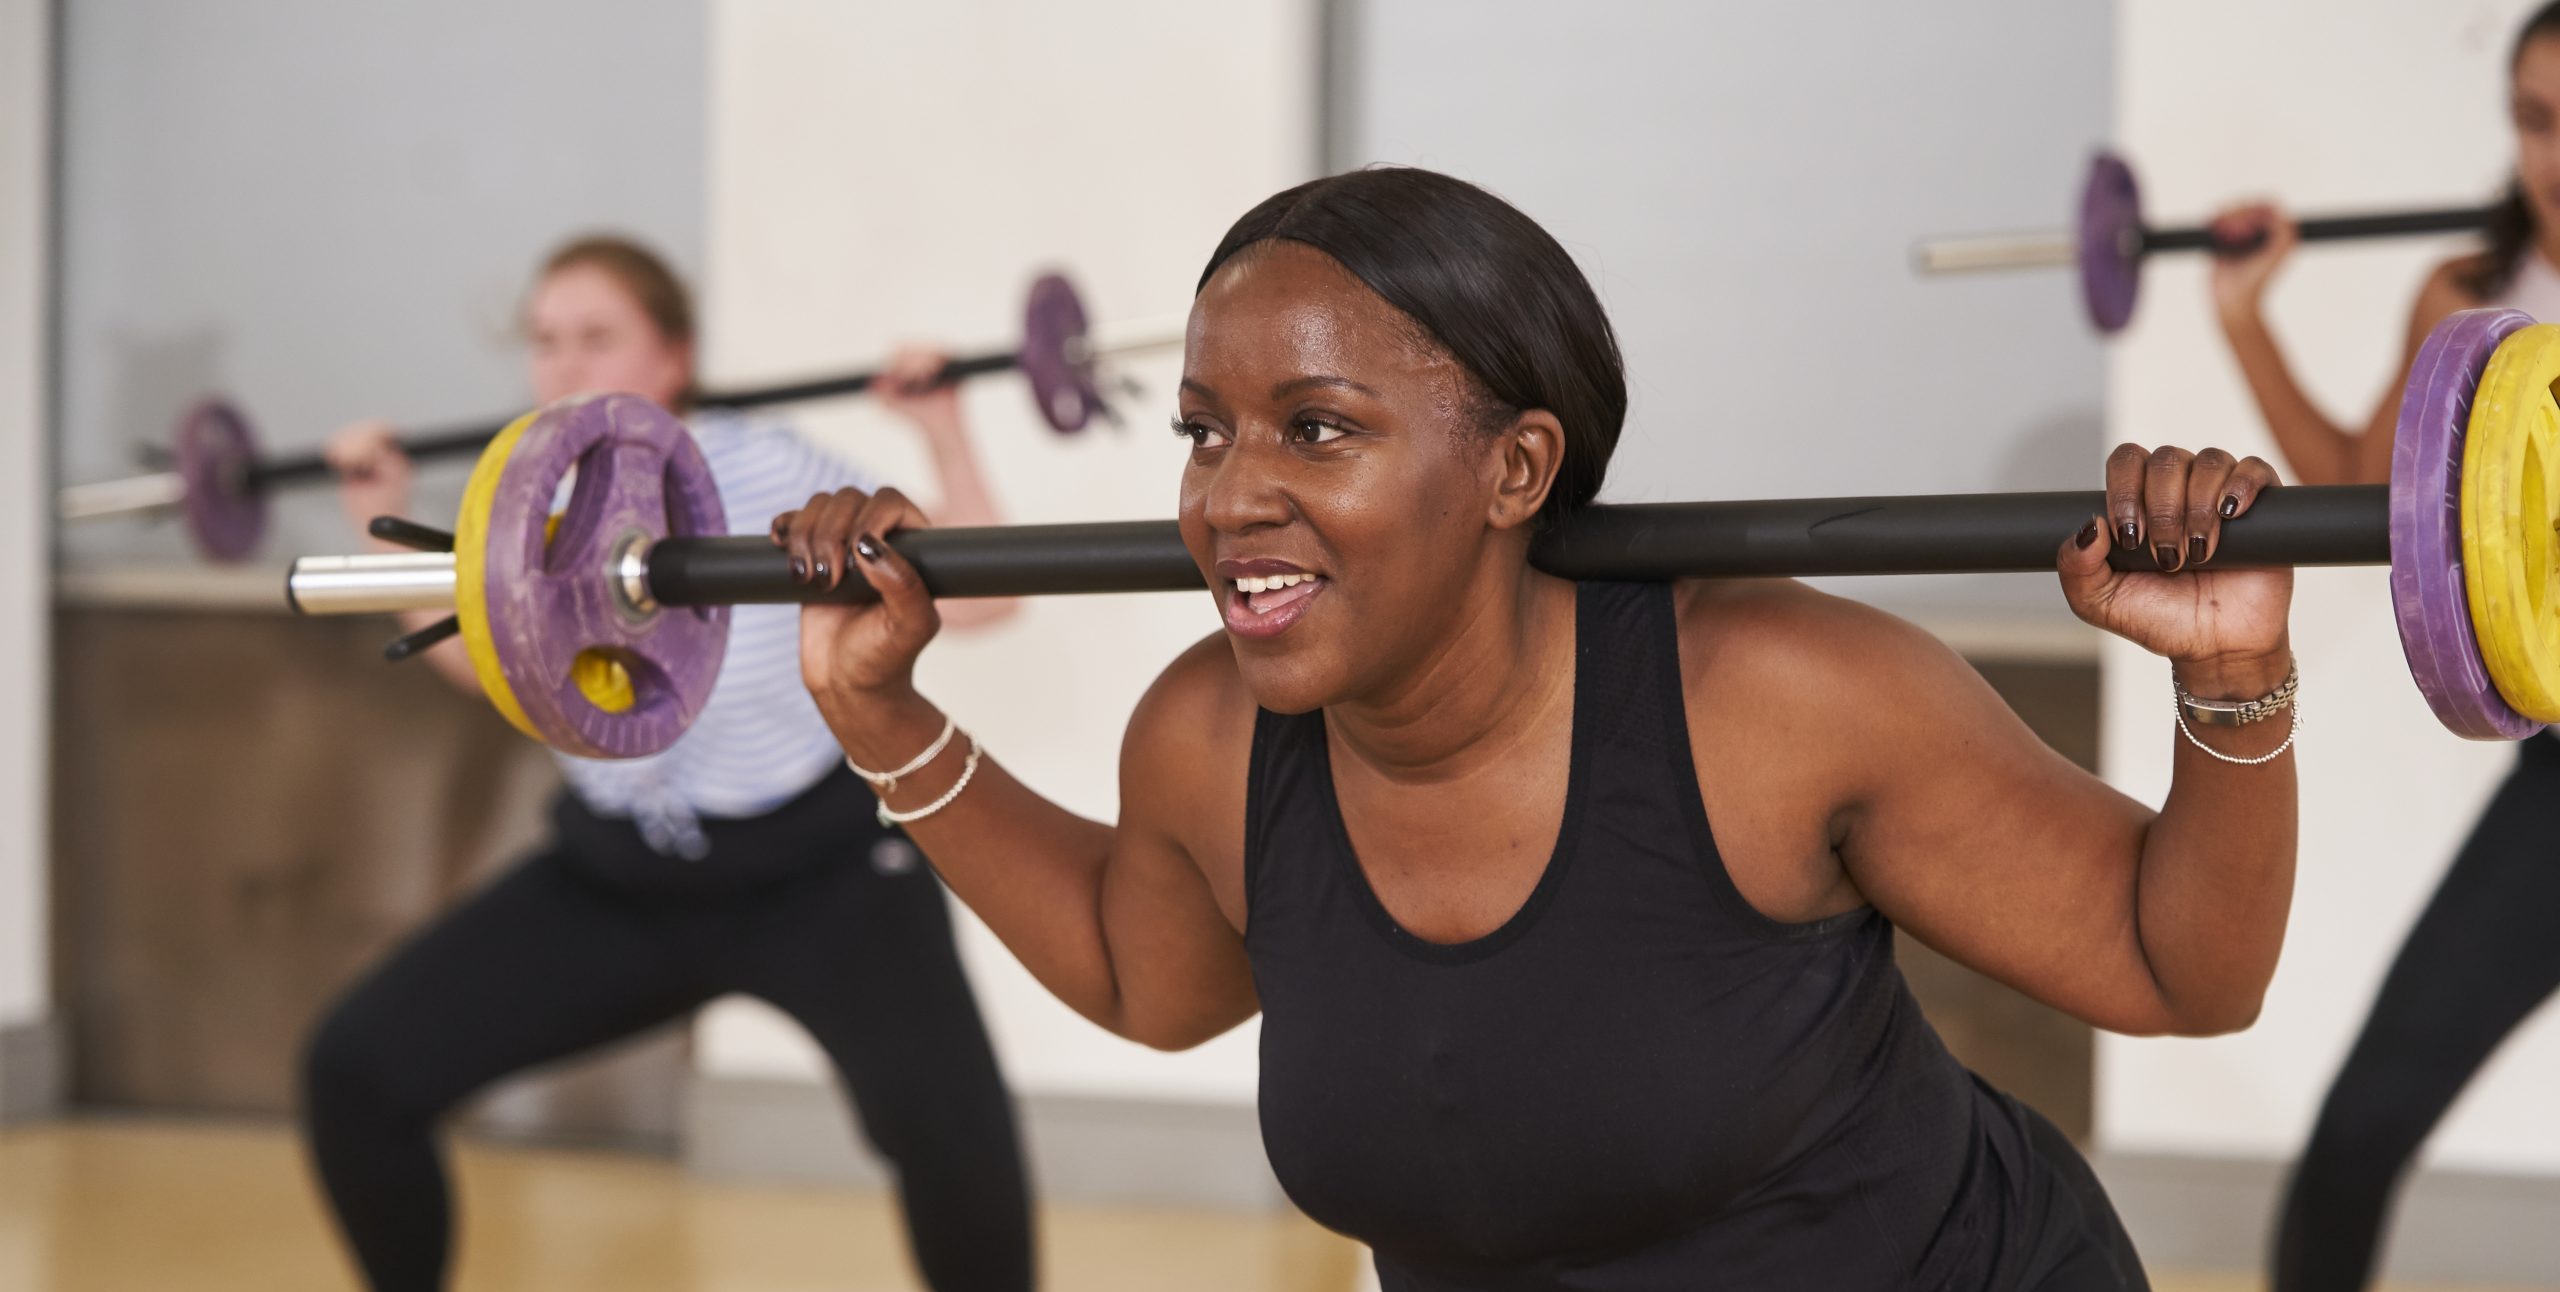 Black woman aged 34-45 lifting weights